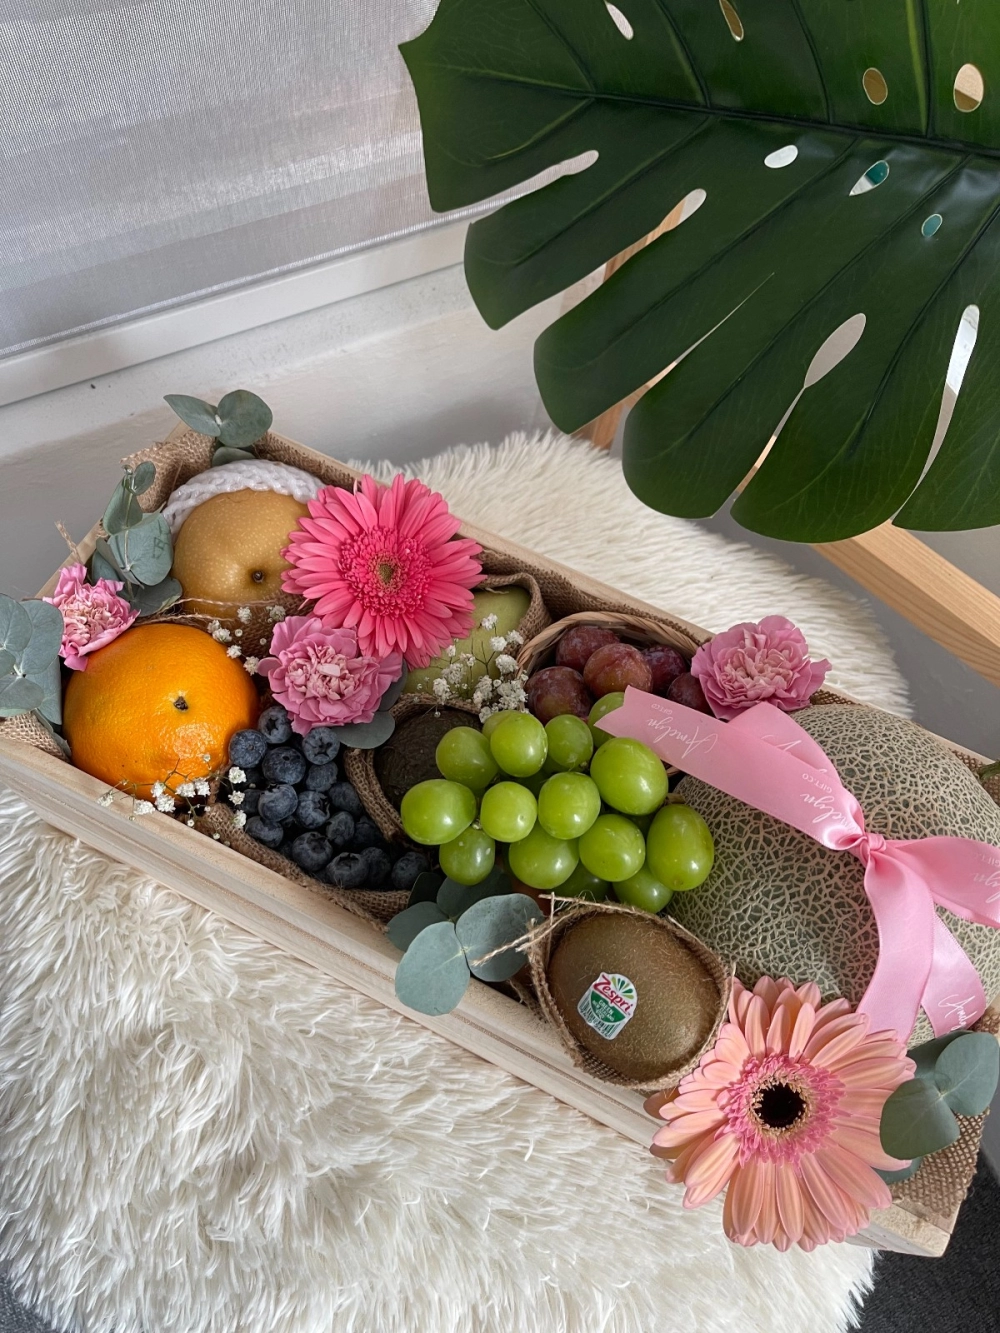 Premium Wooden Crate with Fruits & Flowers